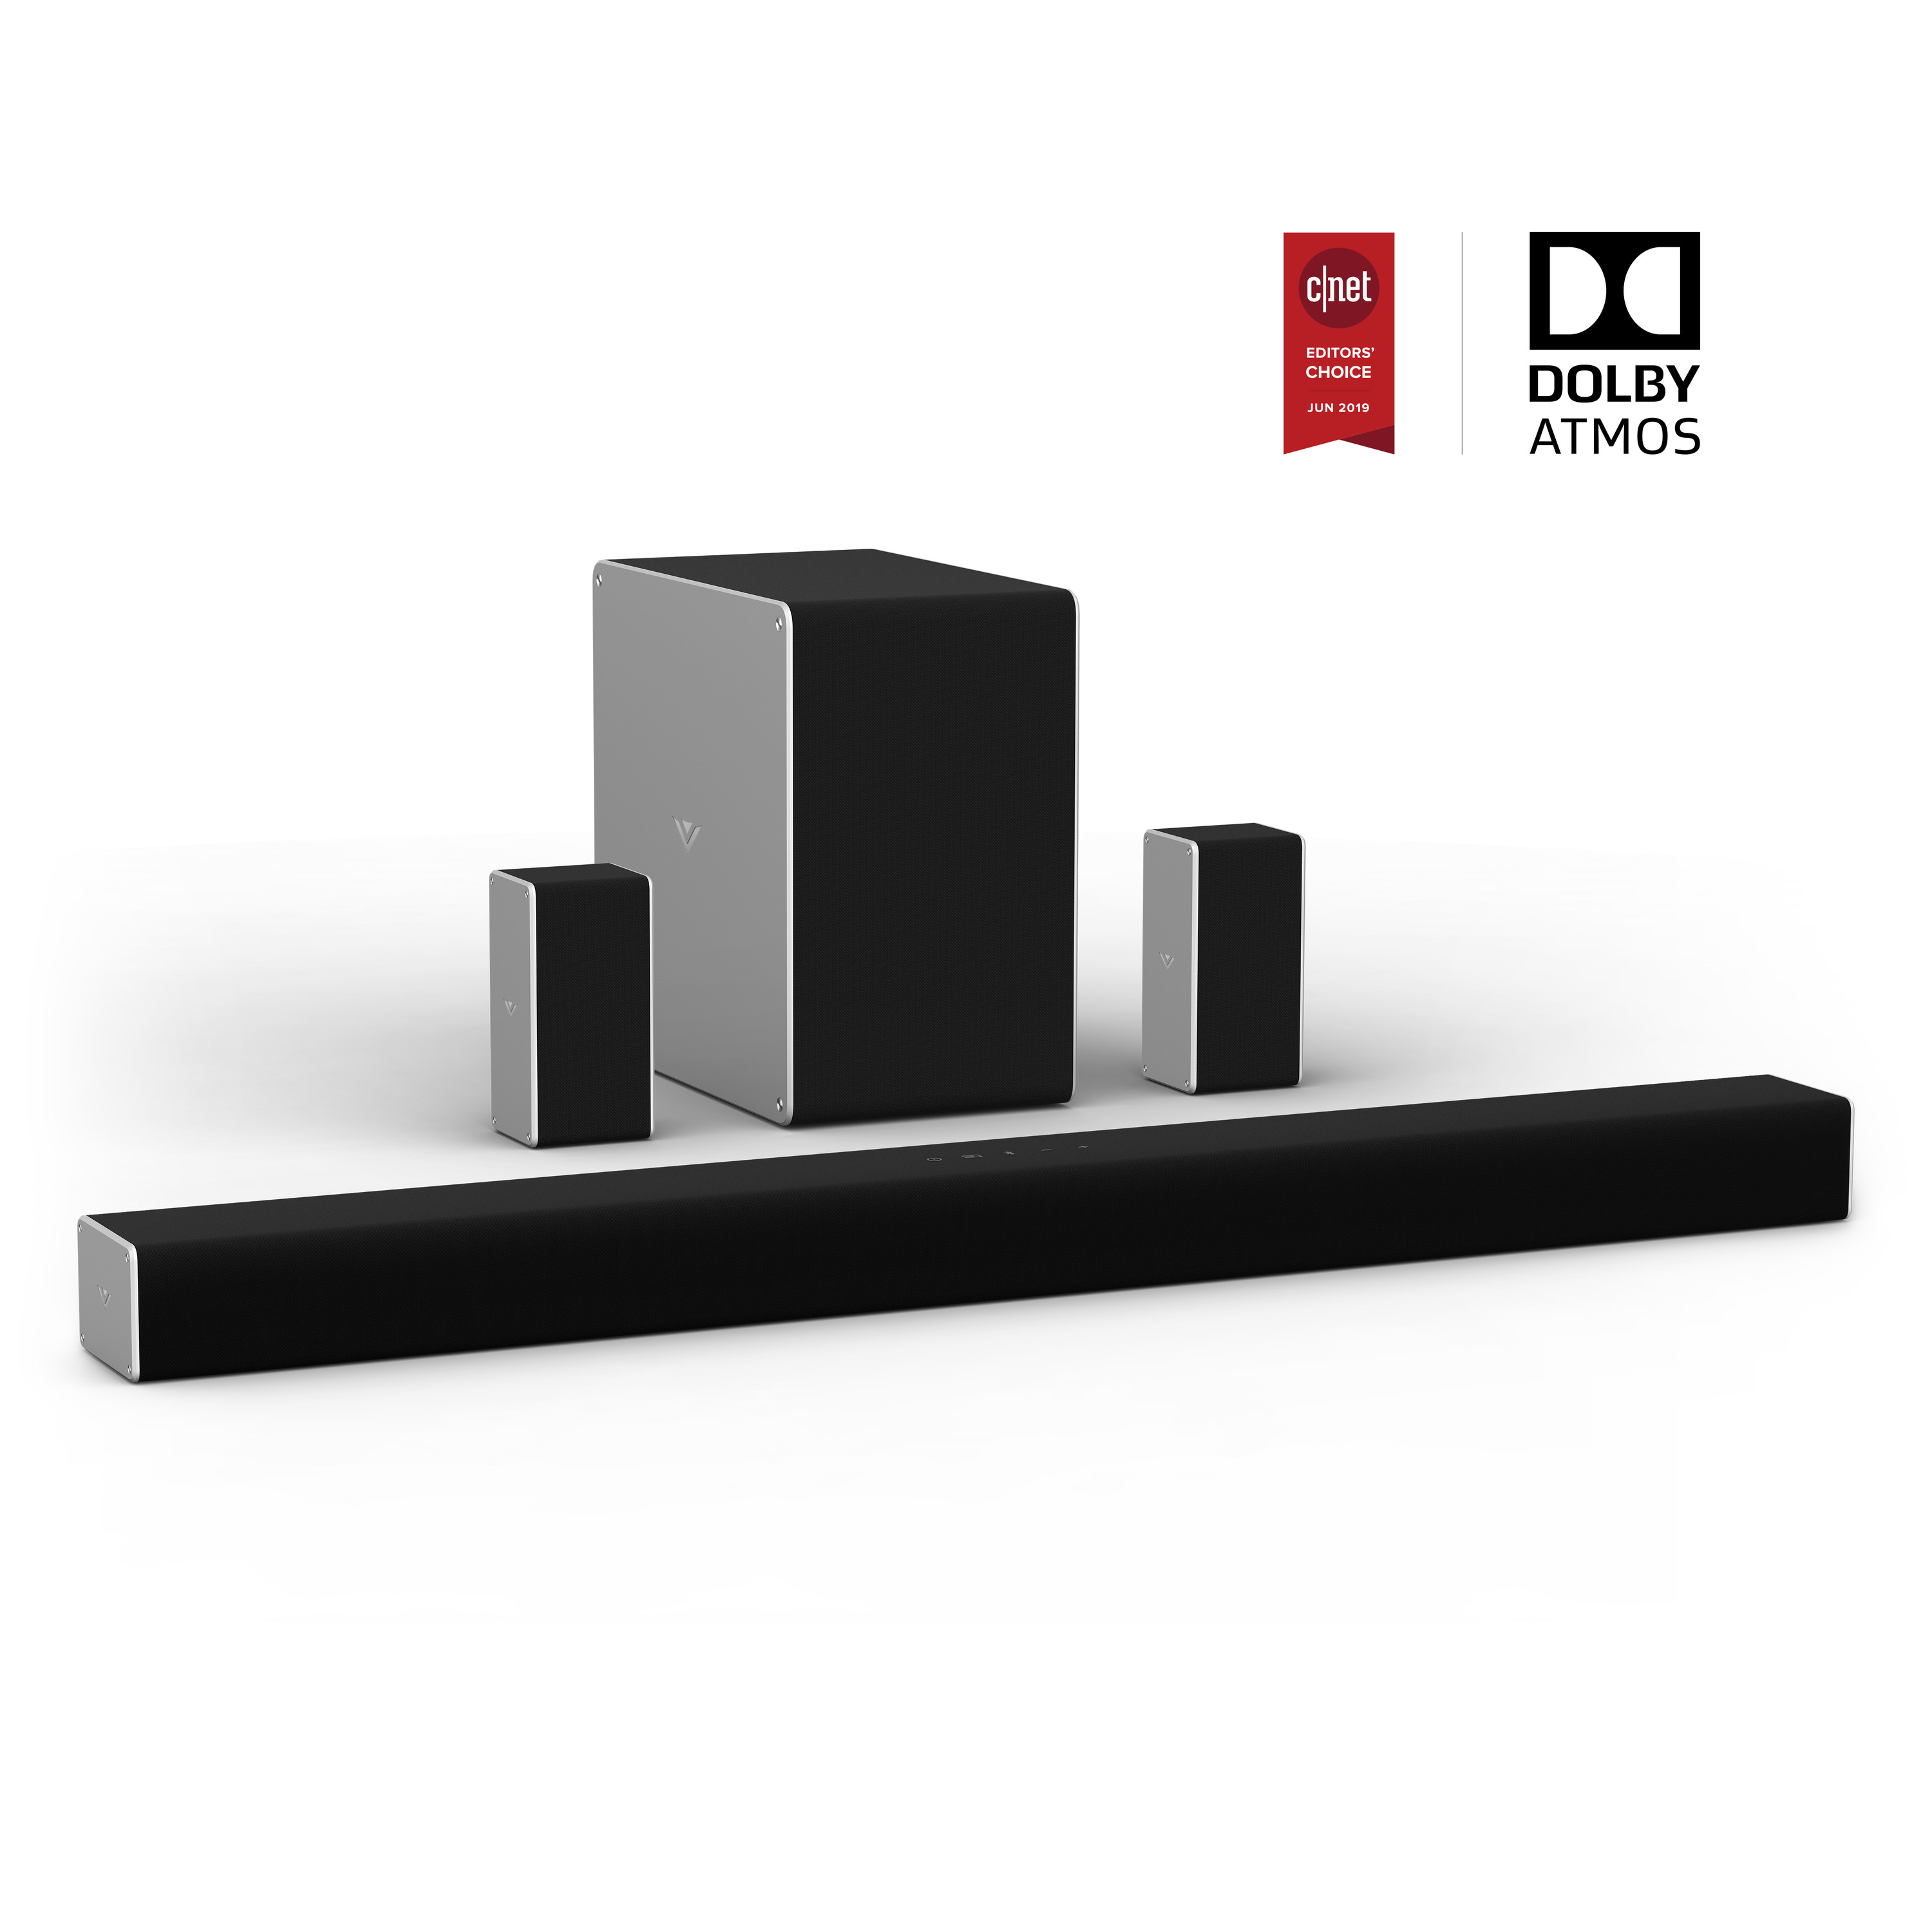 VIZIO 36" 5.1.2 Home Theater Sound System with Dolby Atmos - SB36512-F6 - image 1 of 22